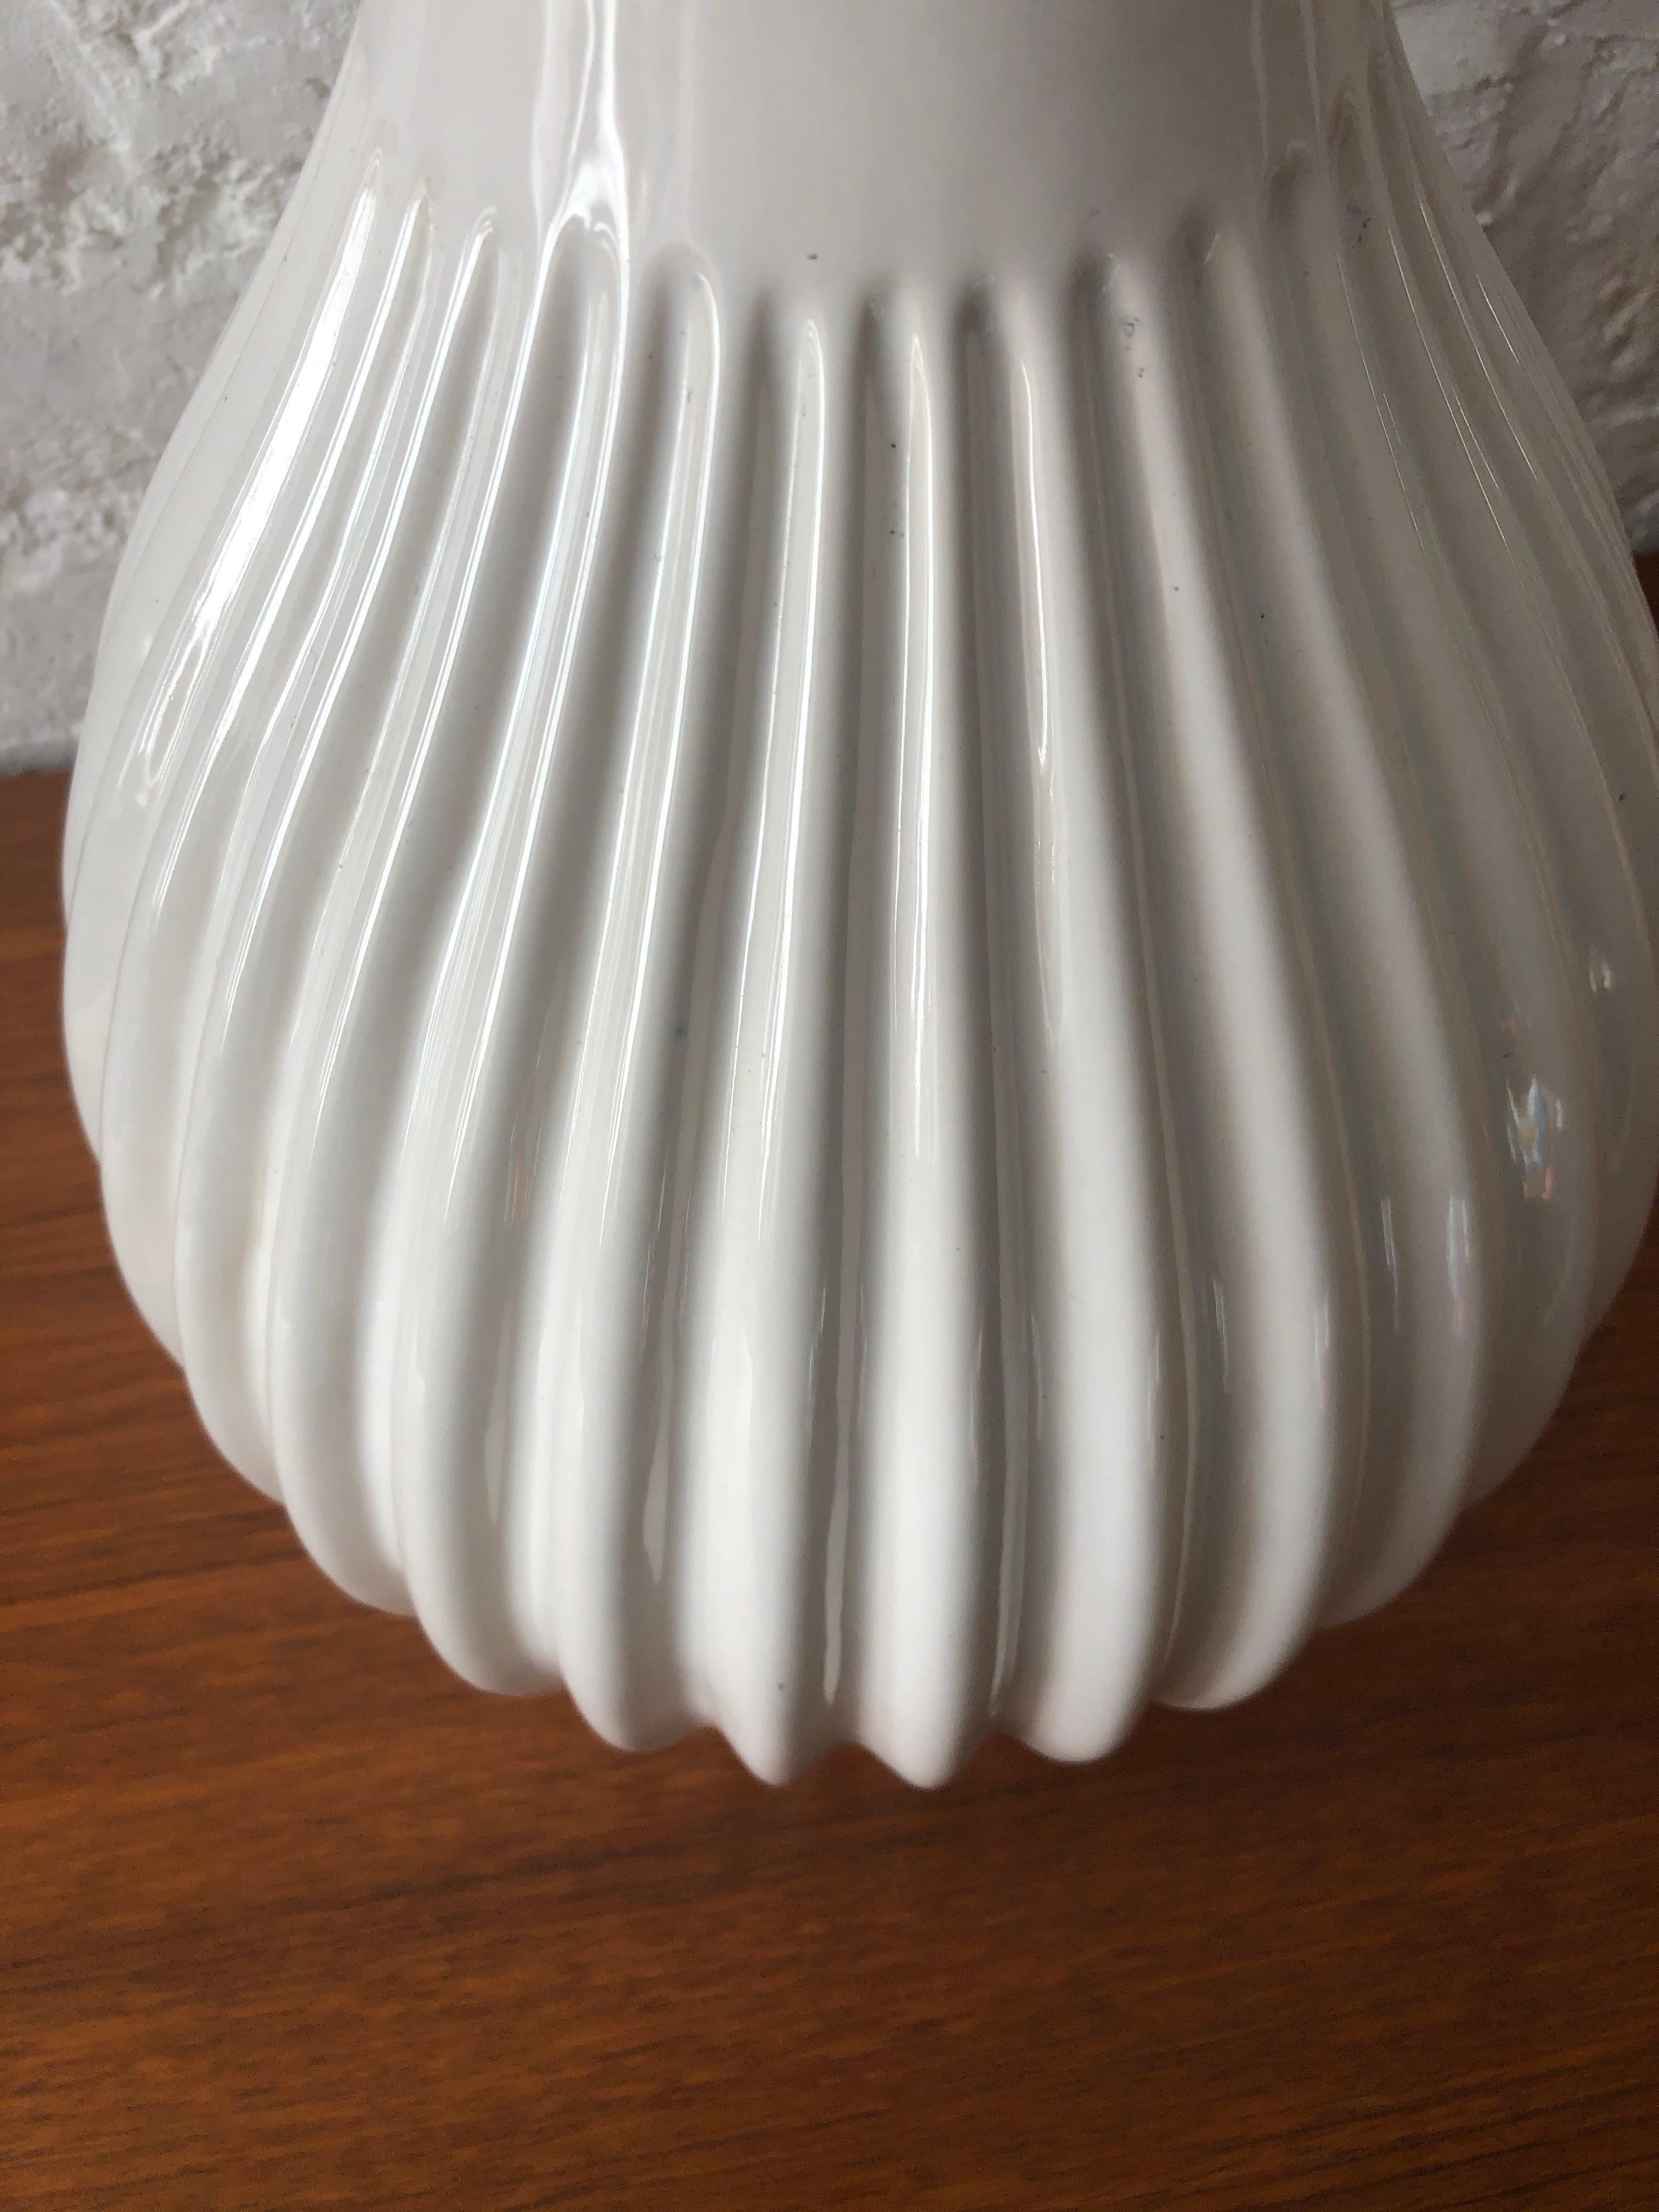 Rare Large Danish Glazed Ceramic Lamp by Michael Andersen & Sons Danish, 1950s In Good Condition For Sale In Richmond, Surrey